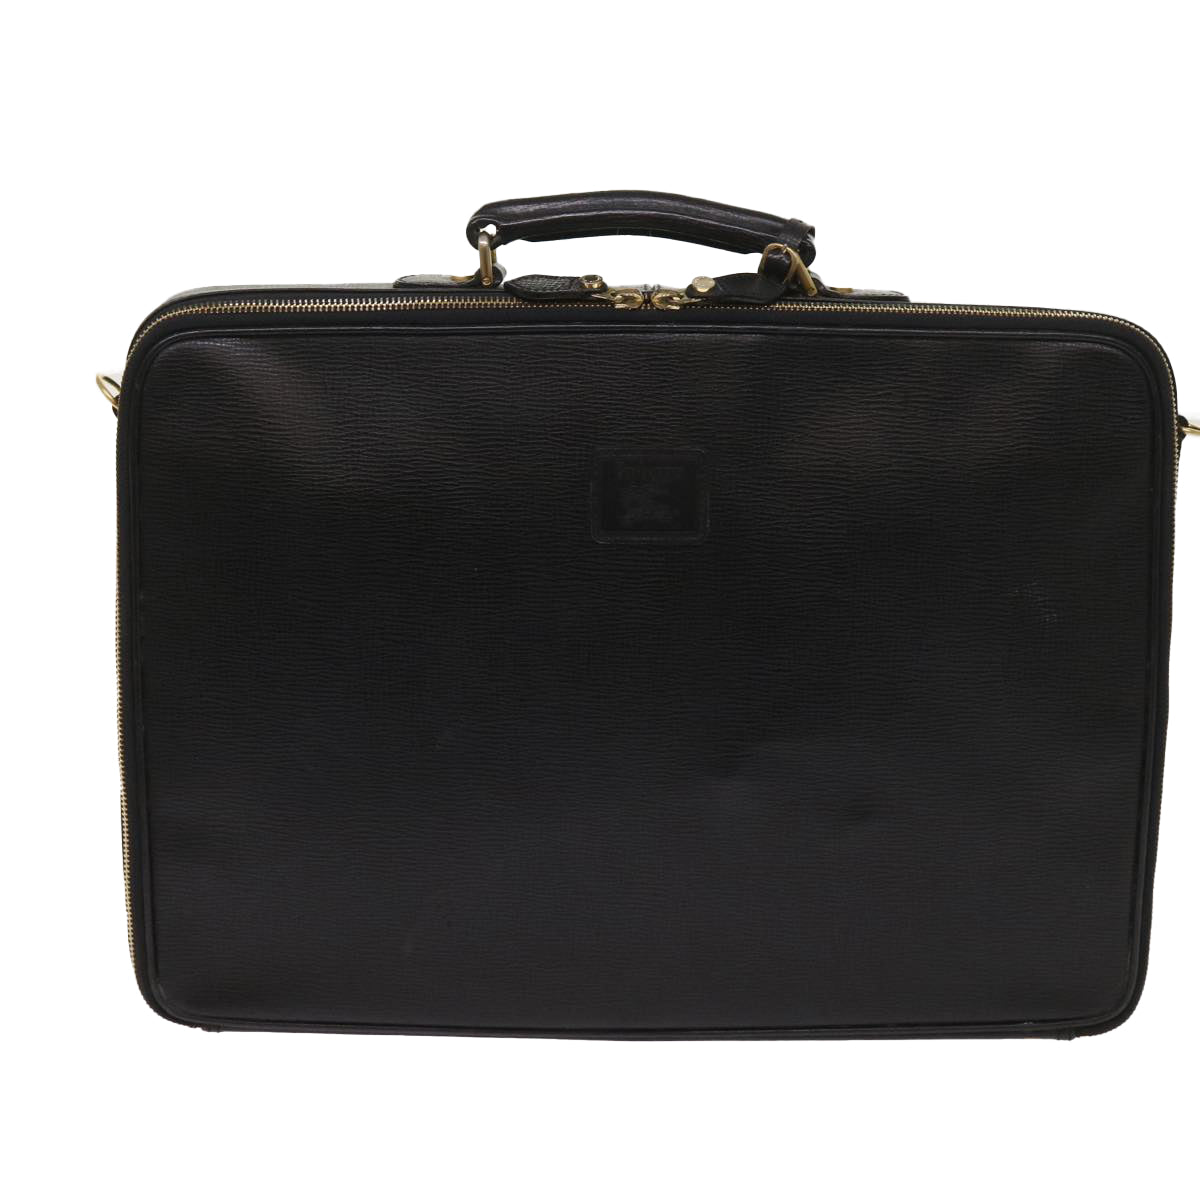 Burberrys Business Bag Leather 2way Black Auth ac2626 - 0